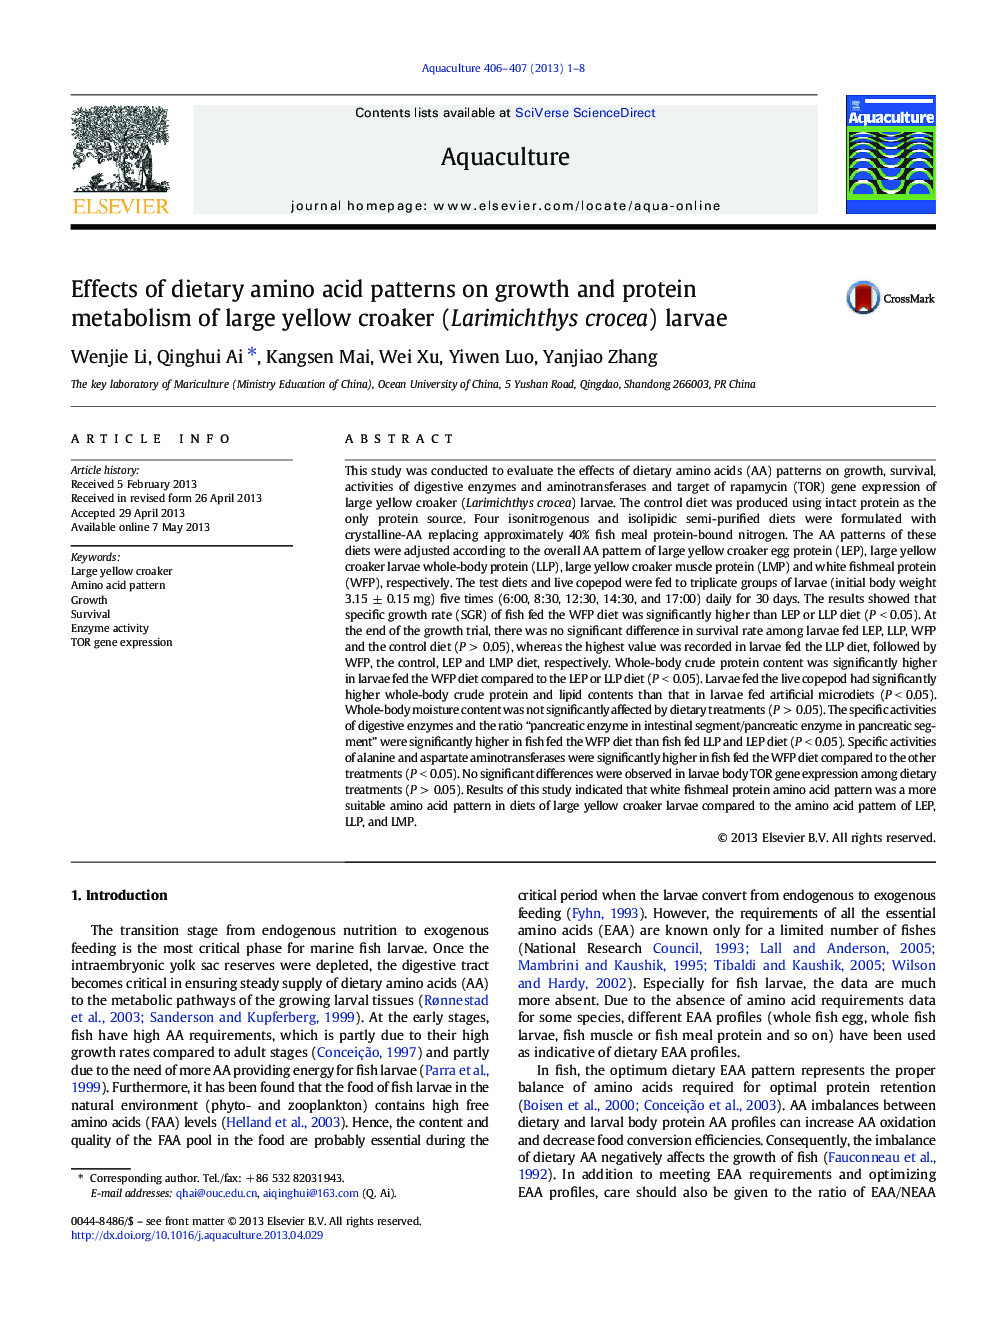 Effects of dietary amino acid patterns on growth and protein metabolism of large yellow croaker (Larimichthys crocea) larvae